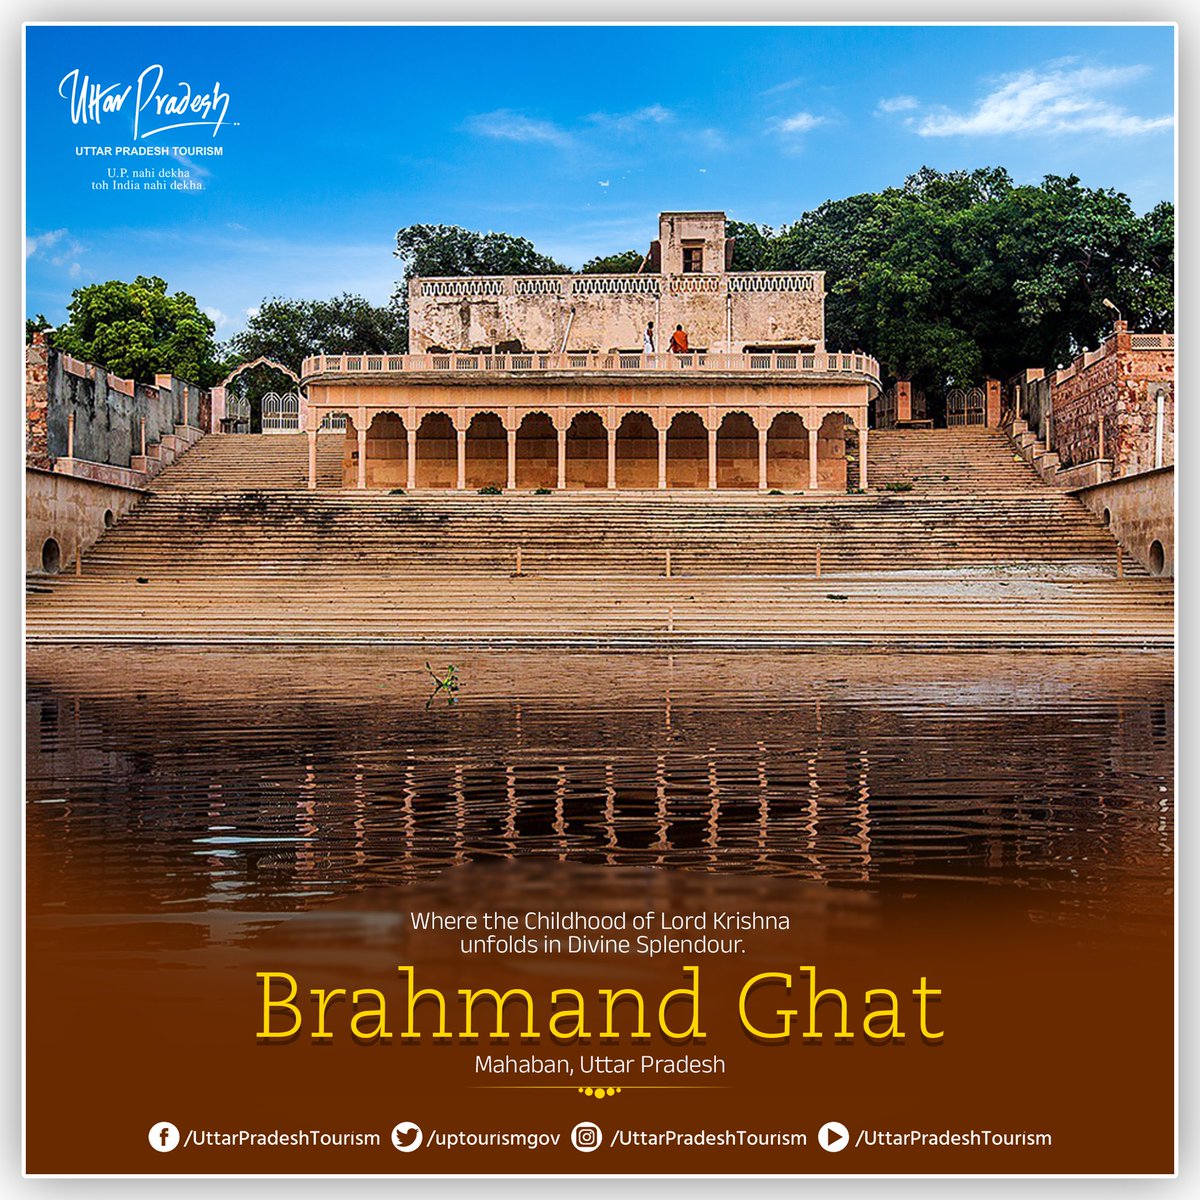 The timeless allure of #BrahmandGhat marks beauty & holiness intertwine. Here, amidst the serene surroundings, stands an ancient tree revered worldwide. Journey further into the heart of the #Krishna/#BrajCircuit and explore #Mahaban, where the childhood of #LordKrishna unfolds.